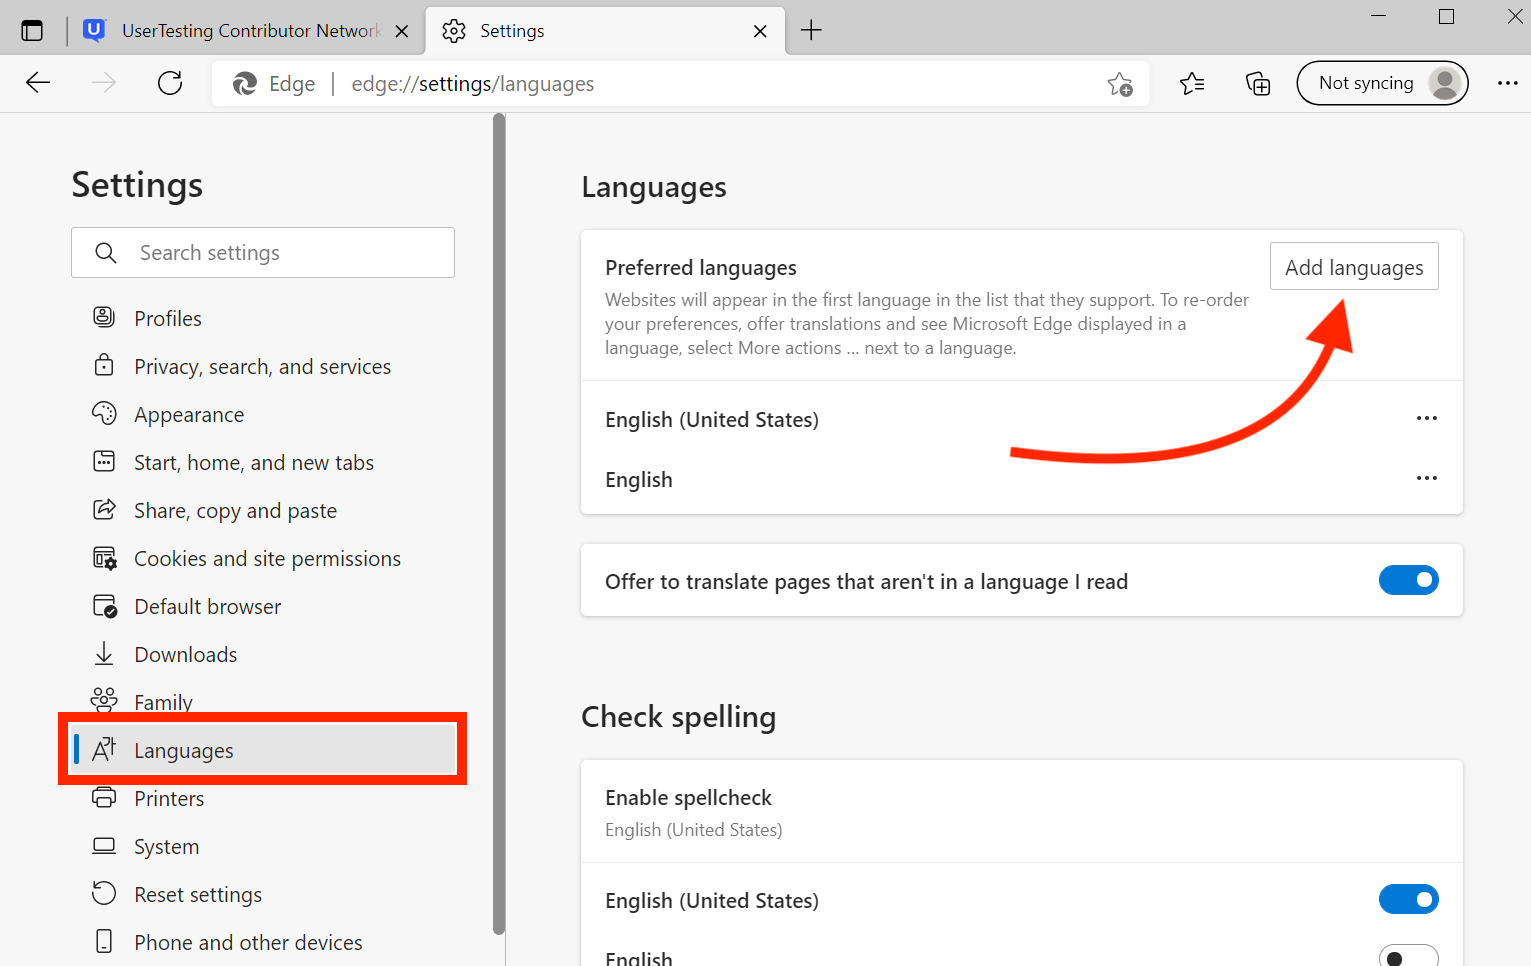 A screenshot of the Microsoft Edge Languages settings with a red arrow pointing to the Add languages button